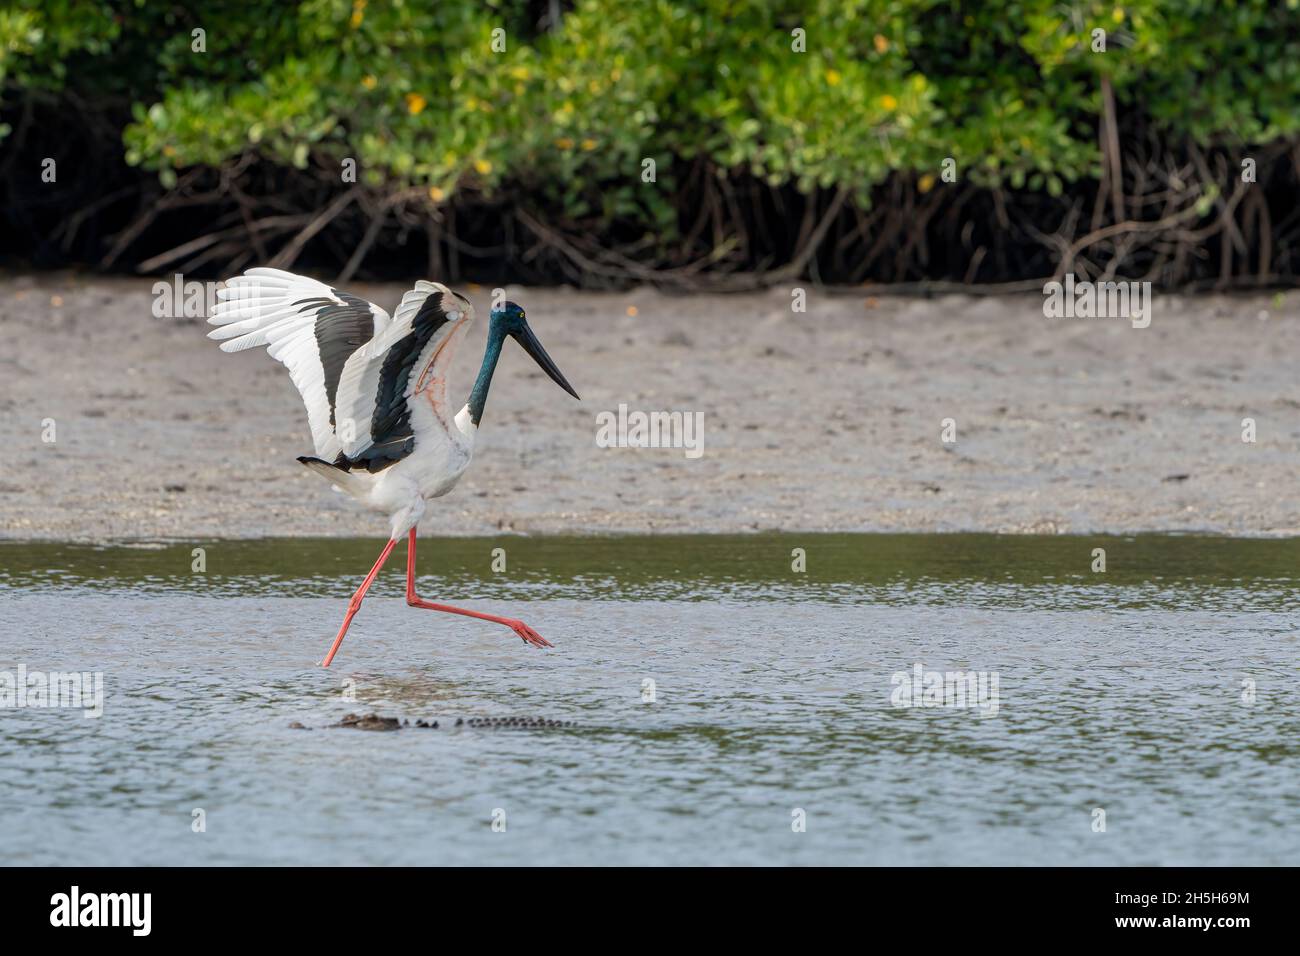 Black-necked stork (Ephippiorhynchus asiaticus) flapping wings to herd fish and crocodile in foreground.  North Queensland, Australia Stock Photo